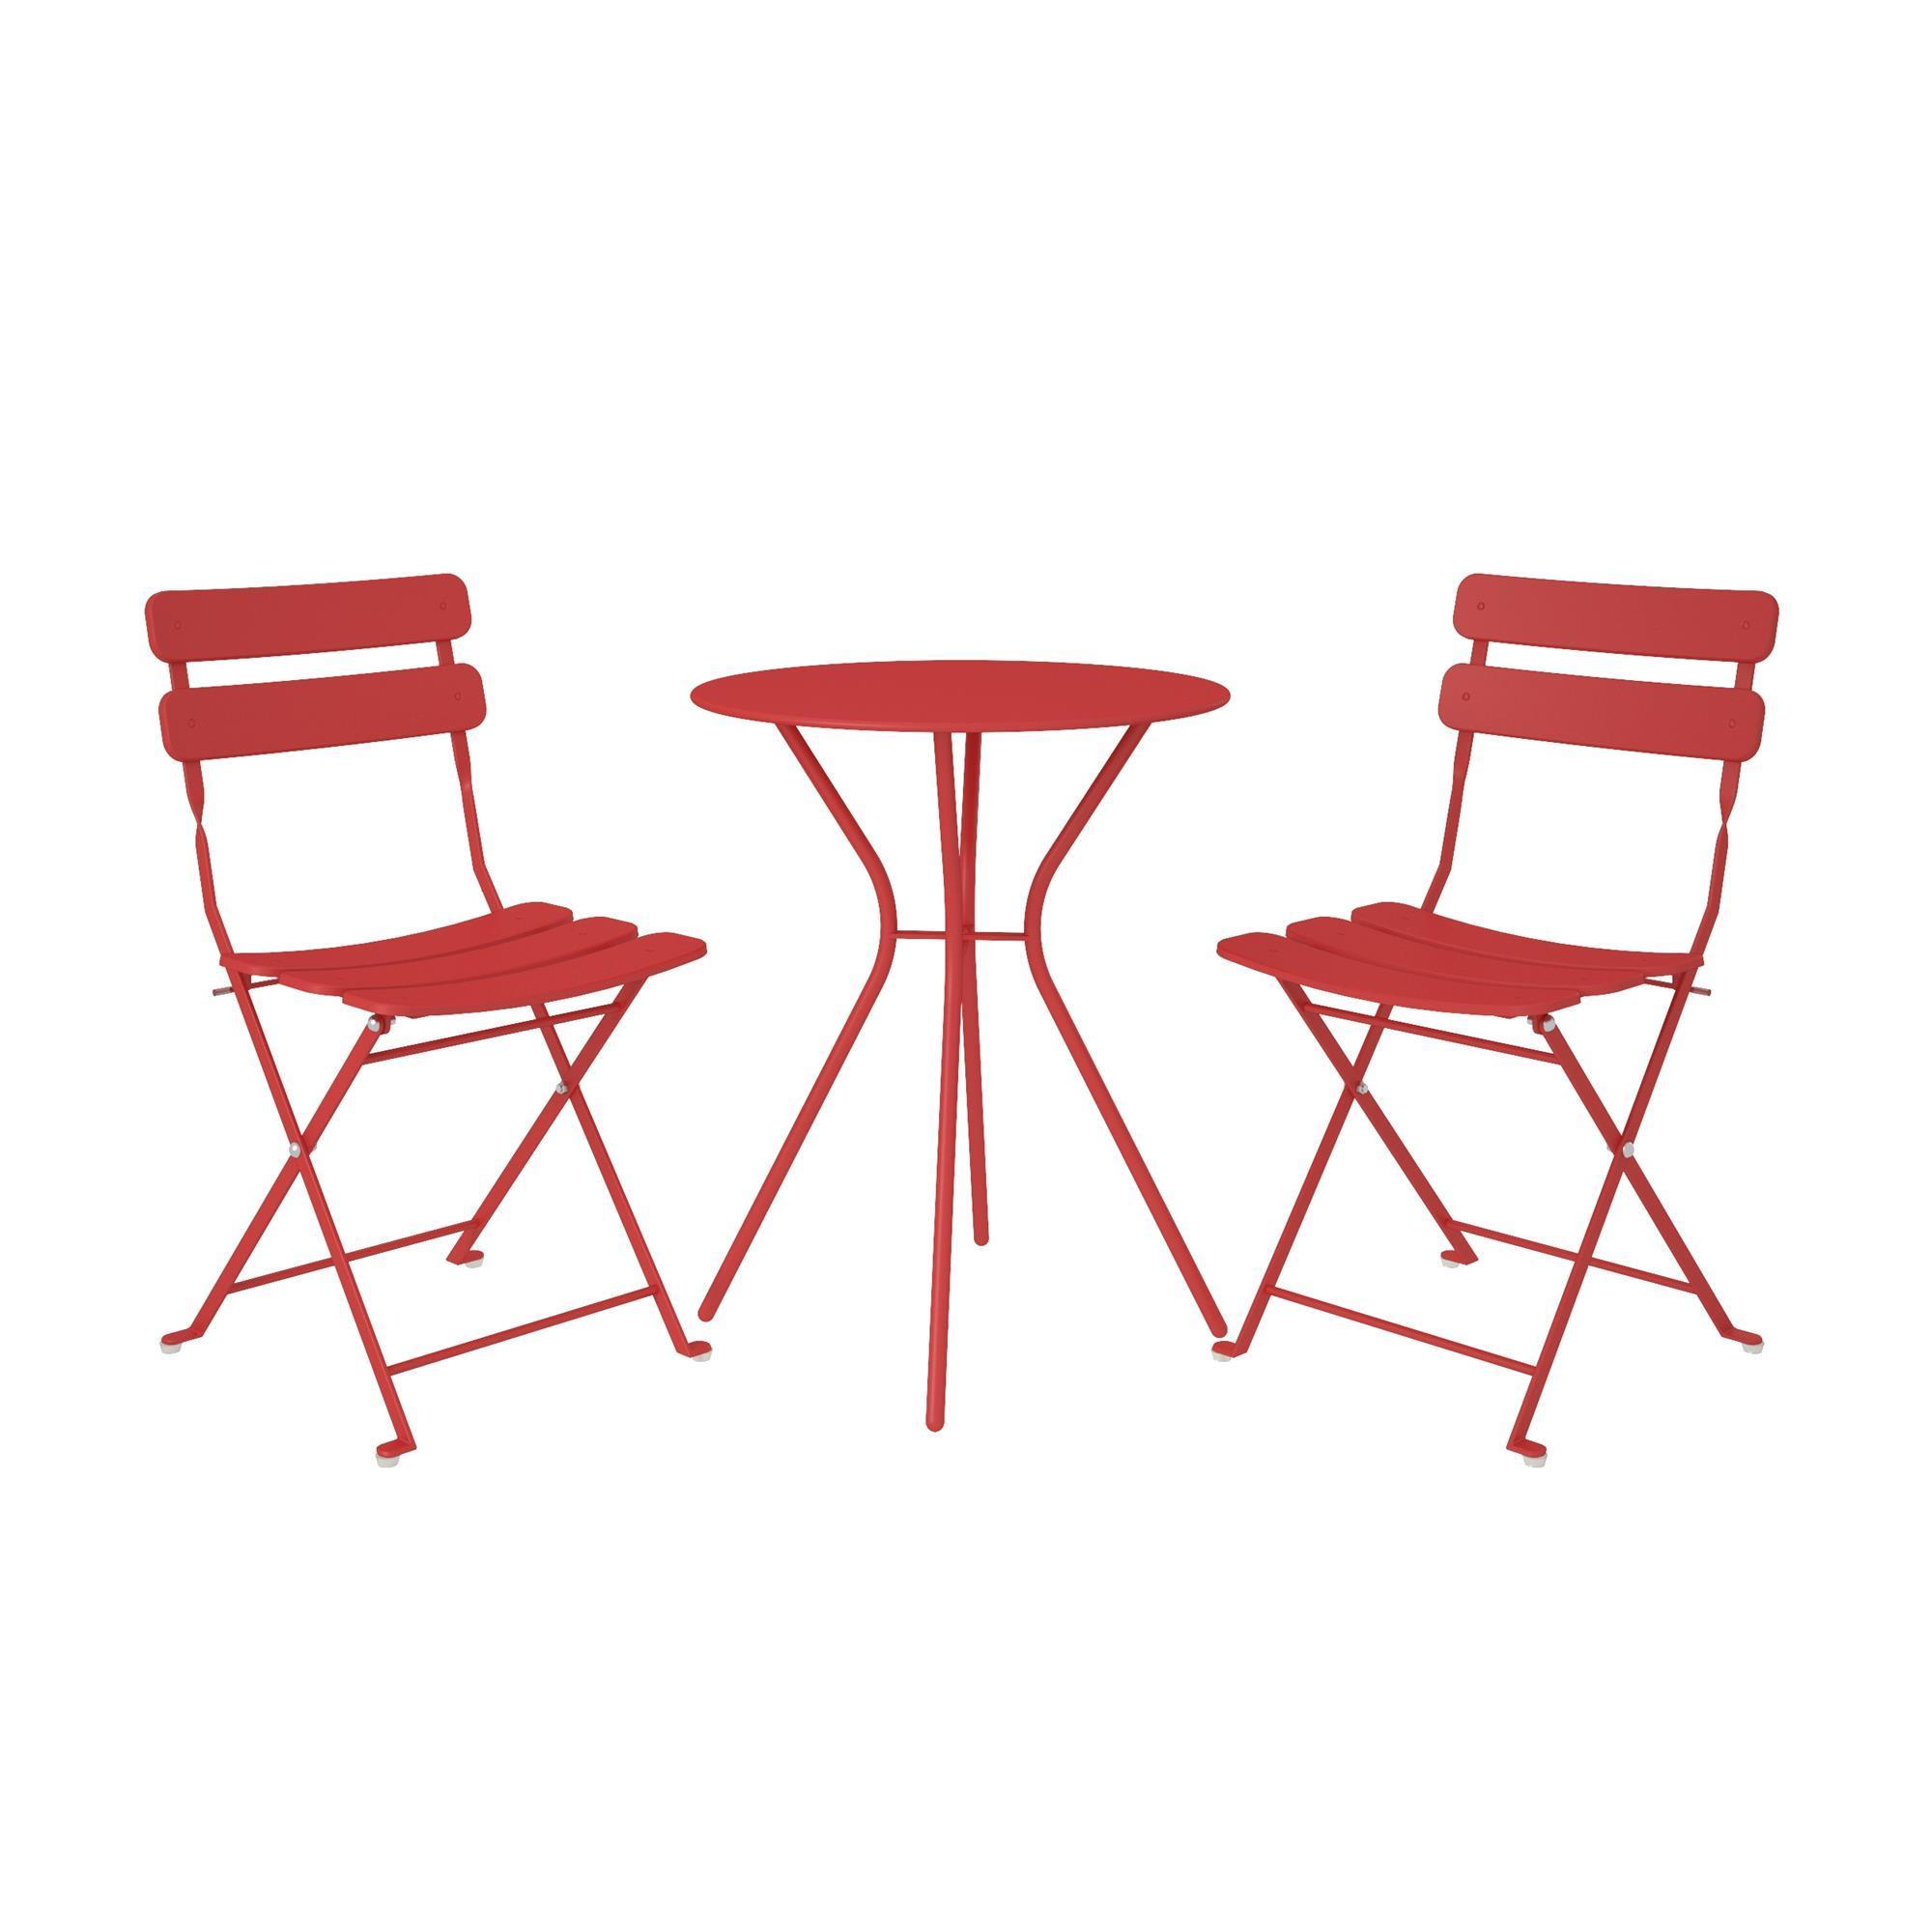 3 Piece Bistro Set with 2 Folding Chairs, Table, Pieces (qty.) 3, Primary Color Red, Seating Capacity 2, Model - Cosco 87623RED1E